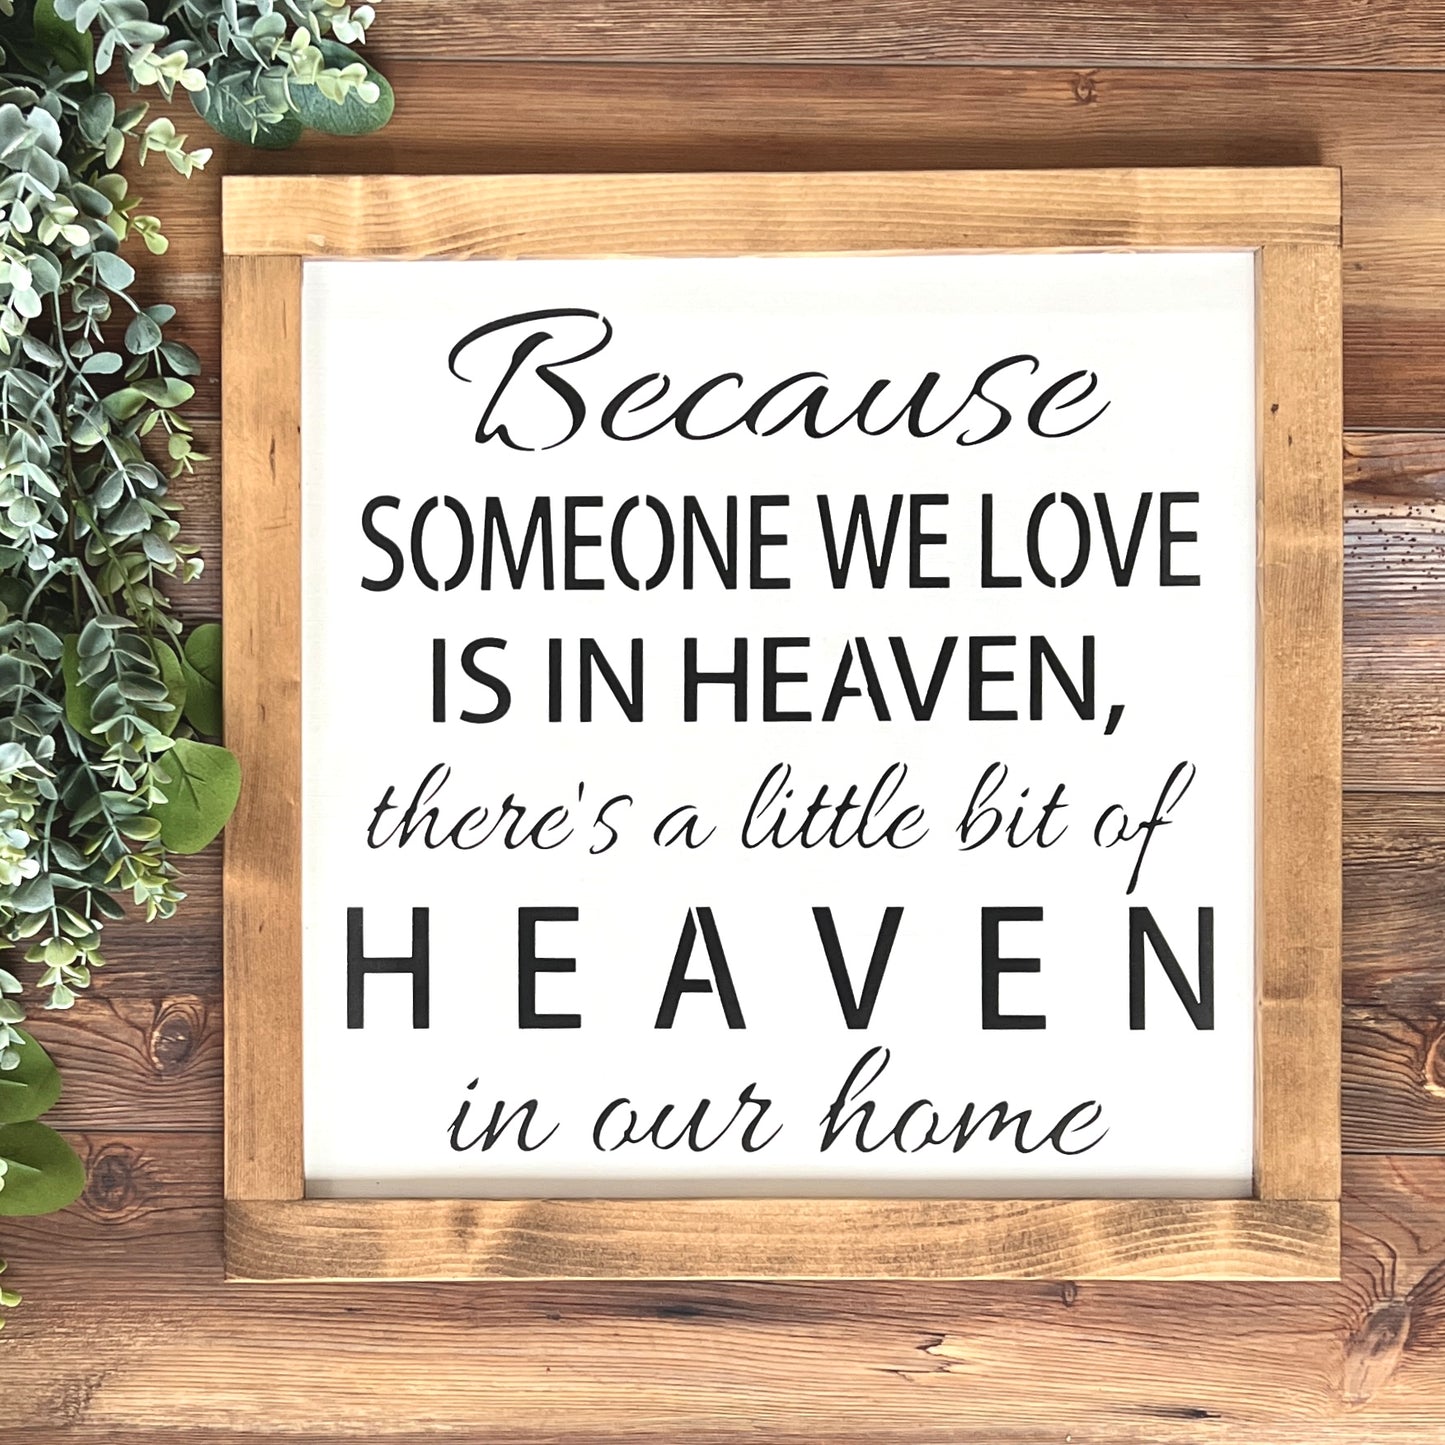 Because someone we love is in heaven wood sign with frame - Condolences gift